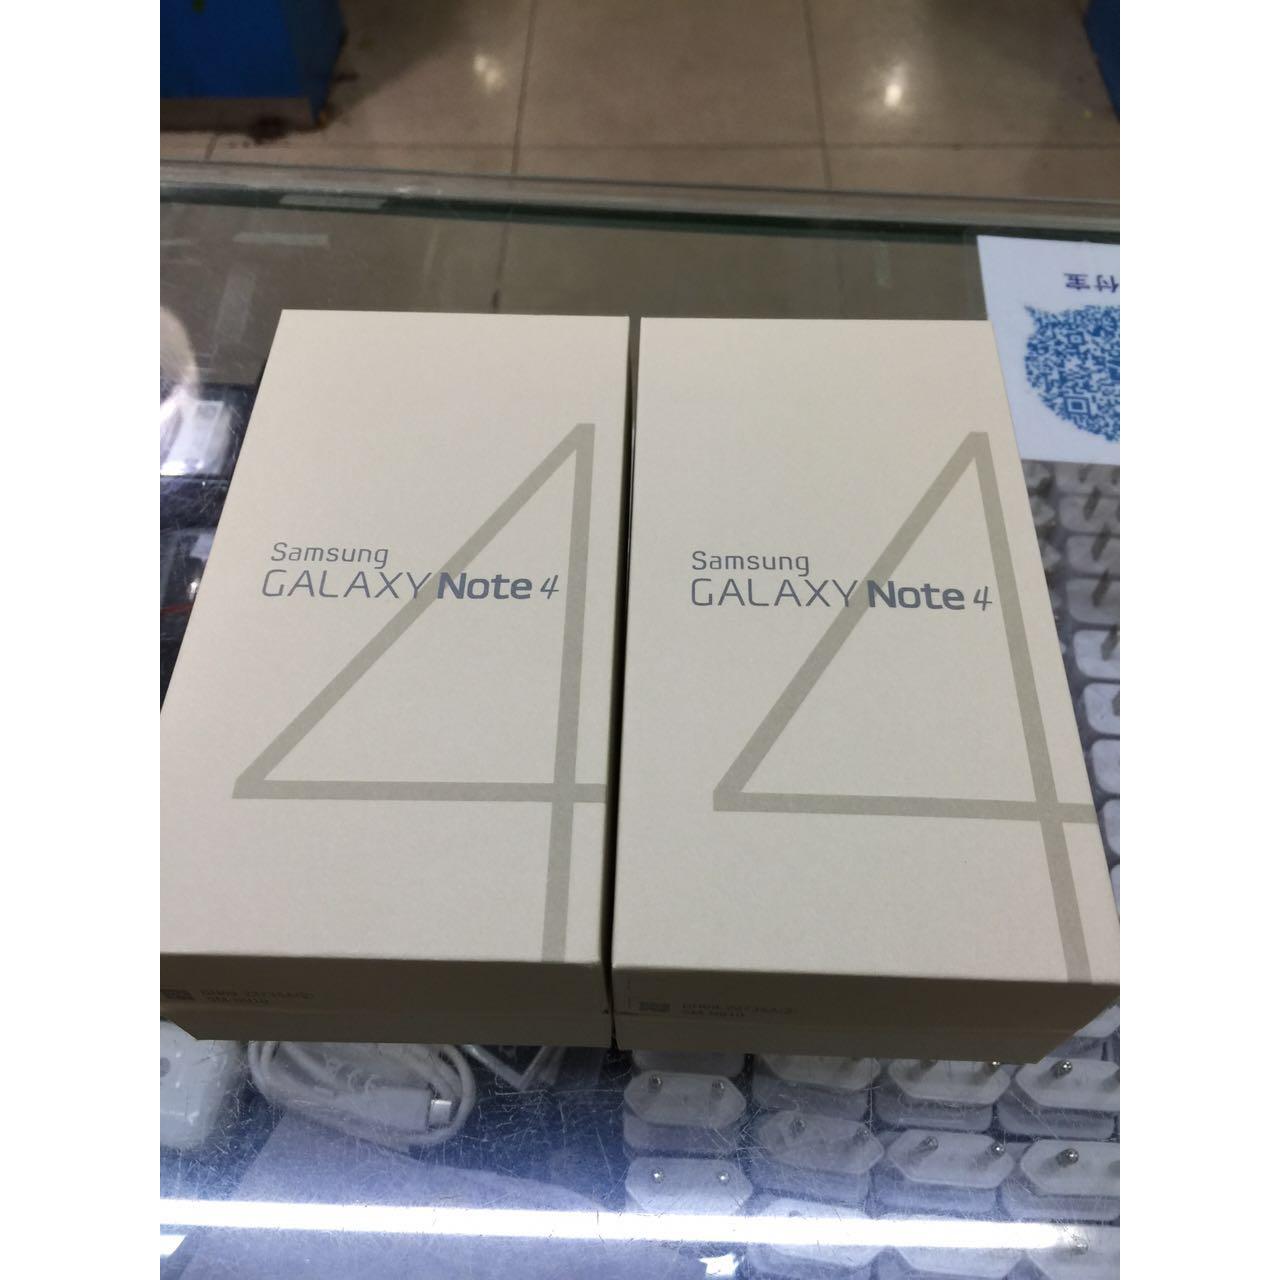 Samsung Samsung Galaxy Note 4 Boxes Wholesale Suppliers